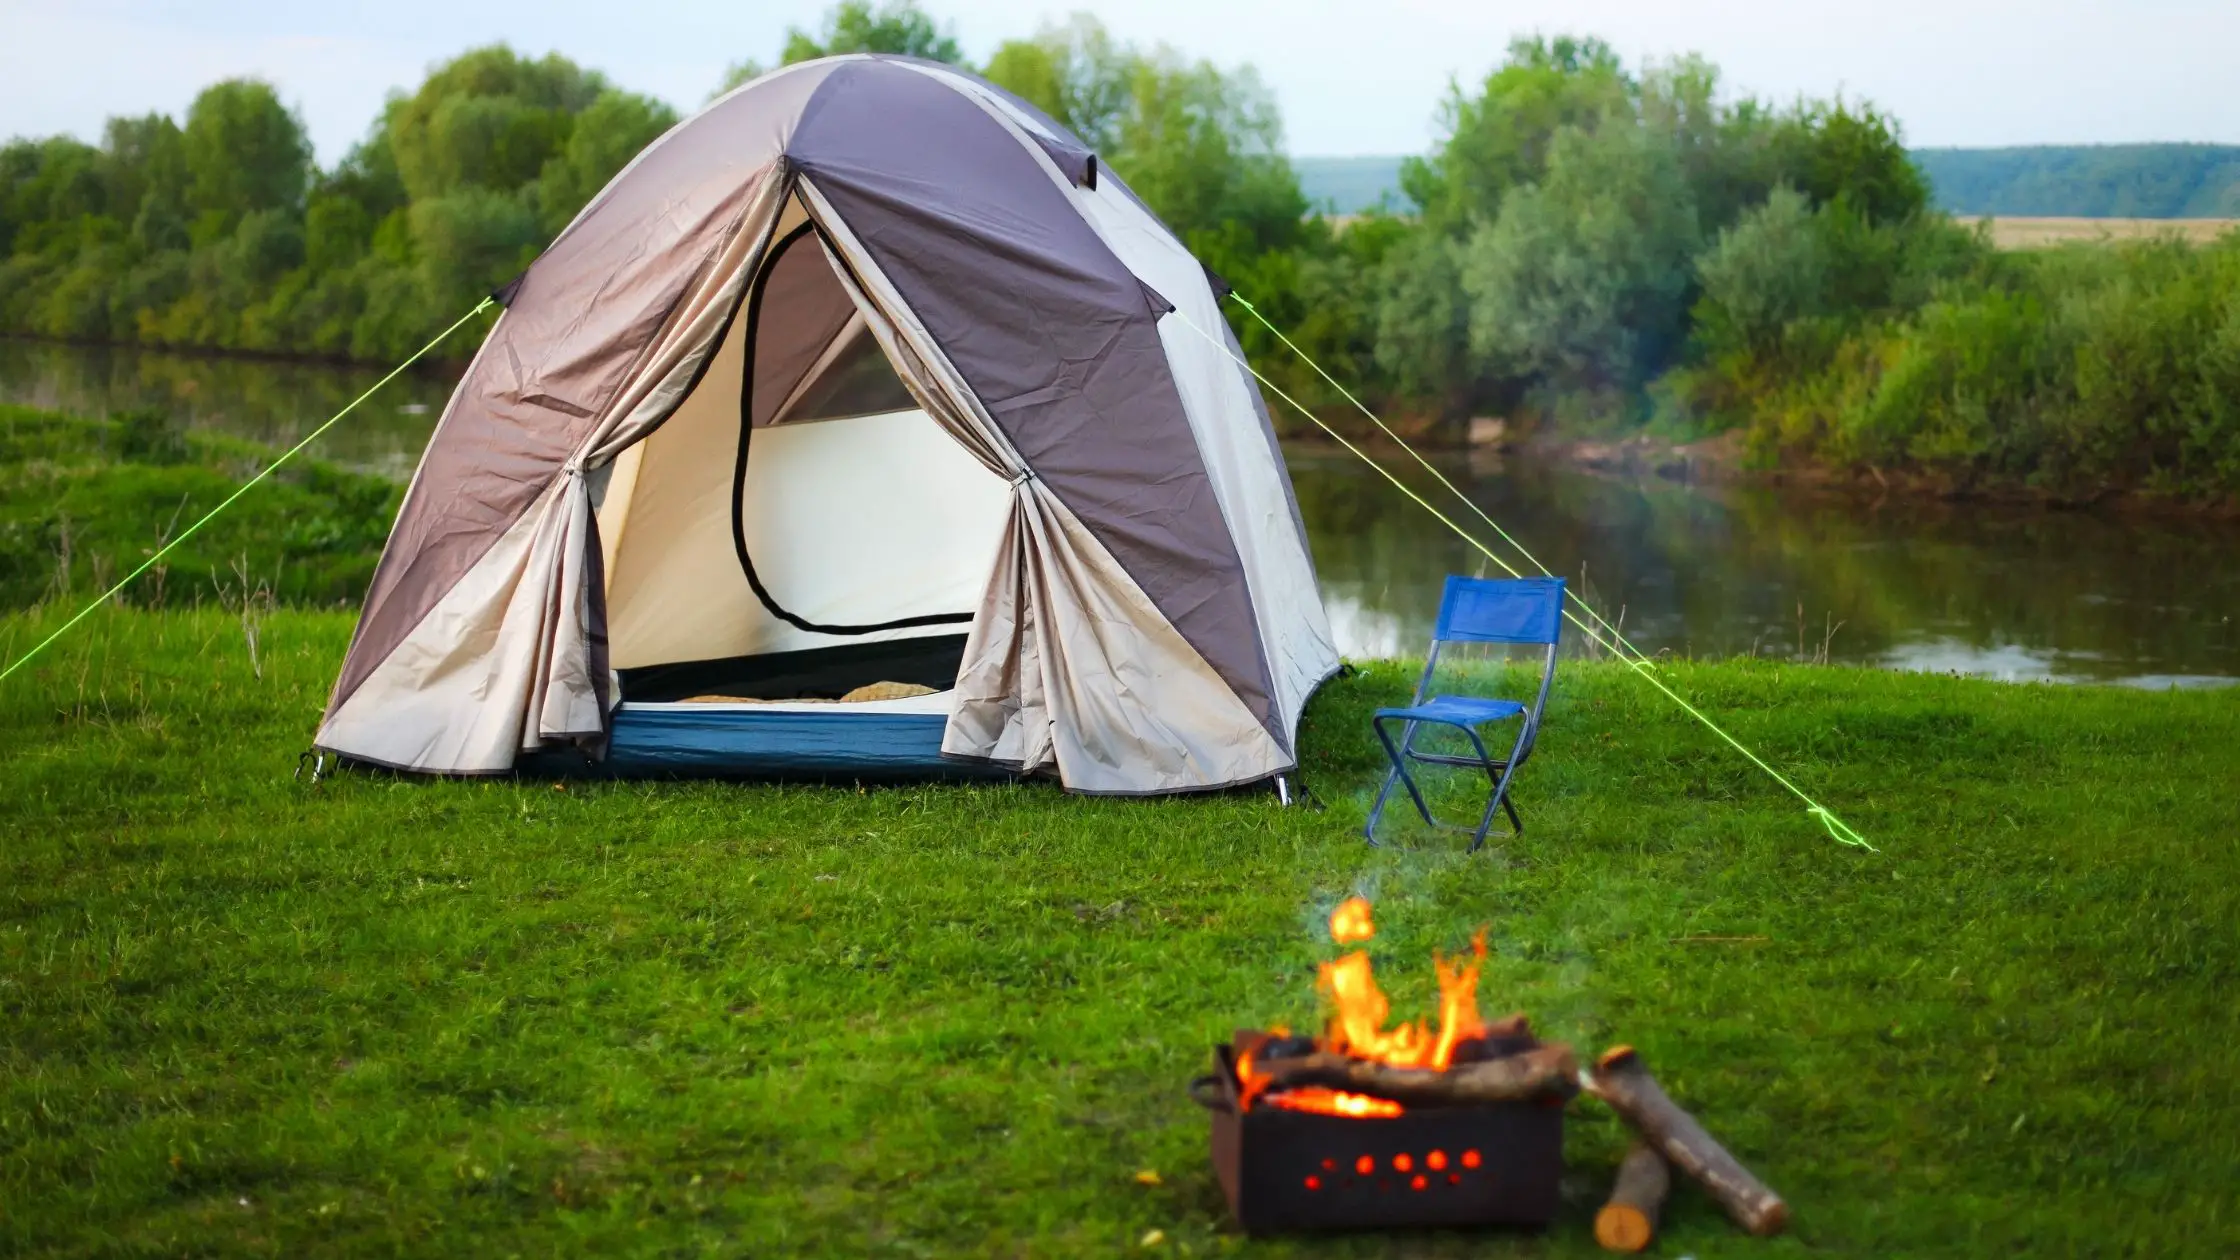 How Safe Is Camping?